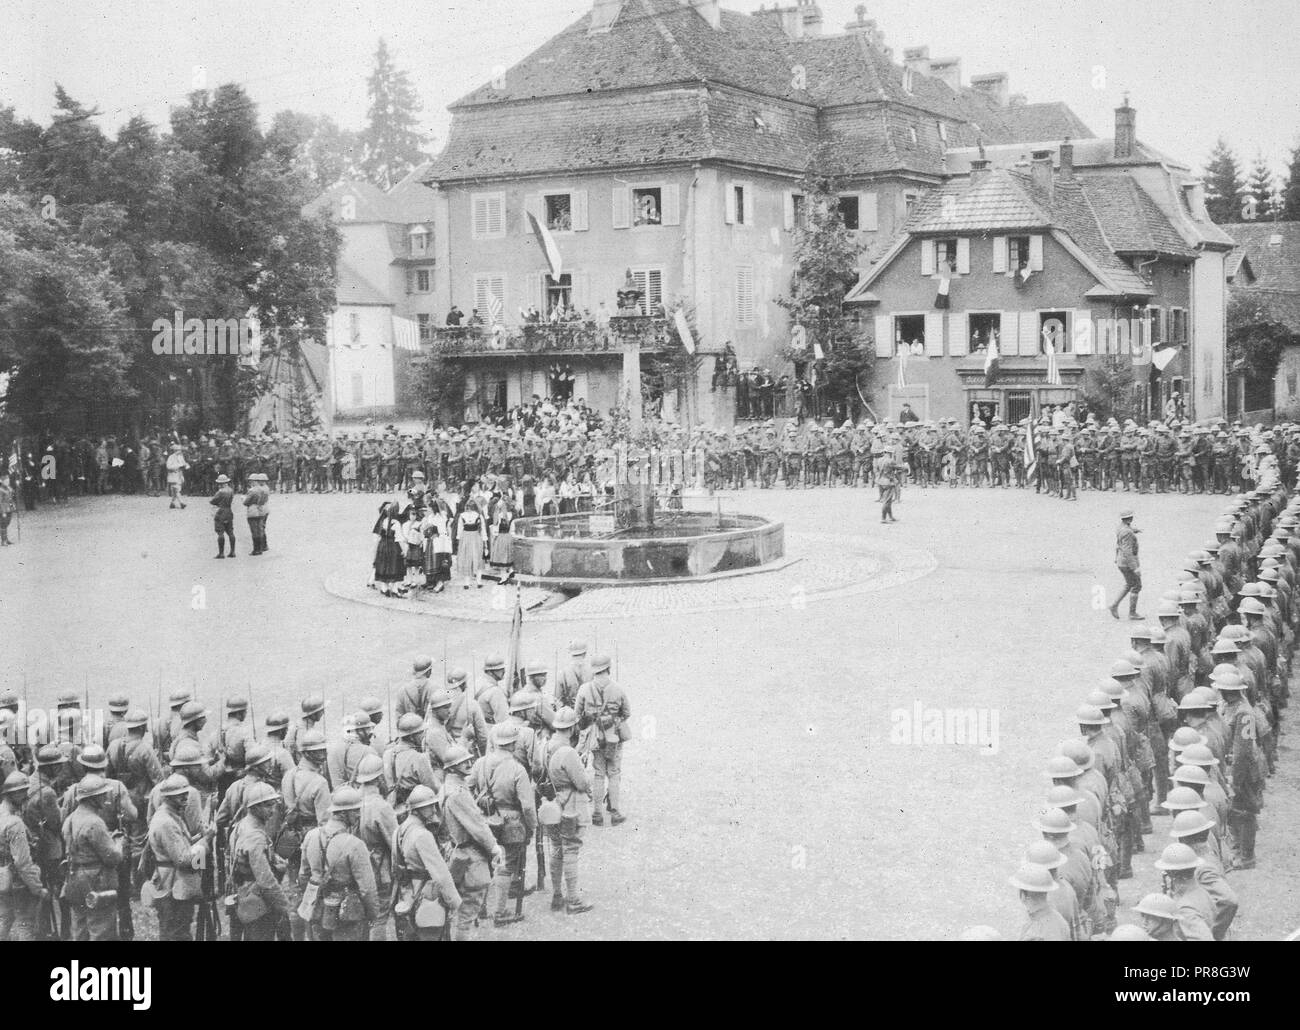 American Independence Day in Alsace. A scene on Independence Day in the Place de Yasseraux. American and French troo[s surround the square at which a patriotic service was held Stock Photo